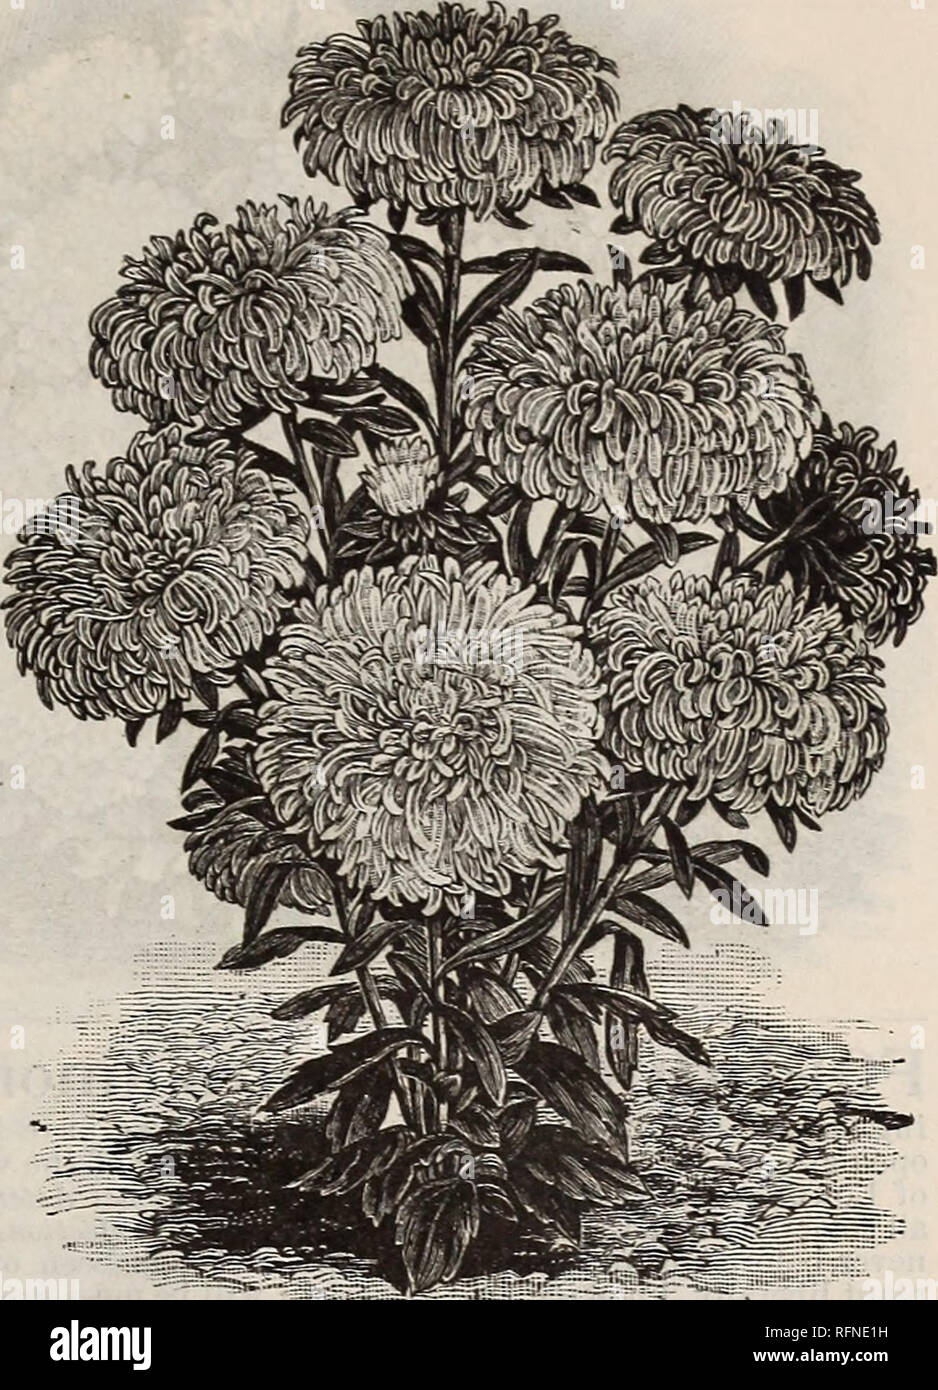 . Burpee's farm annual written at Fordhook Farm. Nurseries (Horticulture) Pennsylvania Philadelphia Catalogs; Vegetables Seeds Catalogs; Plants, Ornamental Catalogs; Flowers Seeds Catalogs. FORDHOOK FLOWER SEEDS. 99 COMET ASTERS. As now developed this magnificent new tribe of Asters comes perfectly true in character ; the plants, twelve to fifteen inches high, form regular pyramids completely covered with superb, large, double flowers, of an intensely artistic beauty. The illustration shows how closely the beautiful flowers, with their ar- tistically curved and twisted petals, resemble the fin Stock Photo